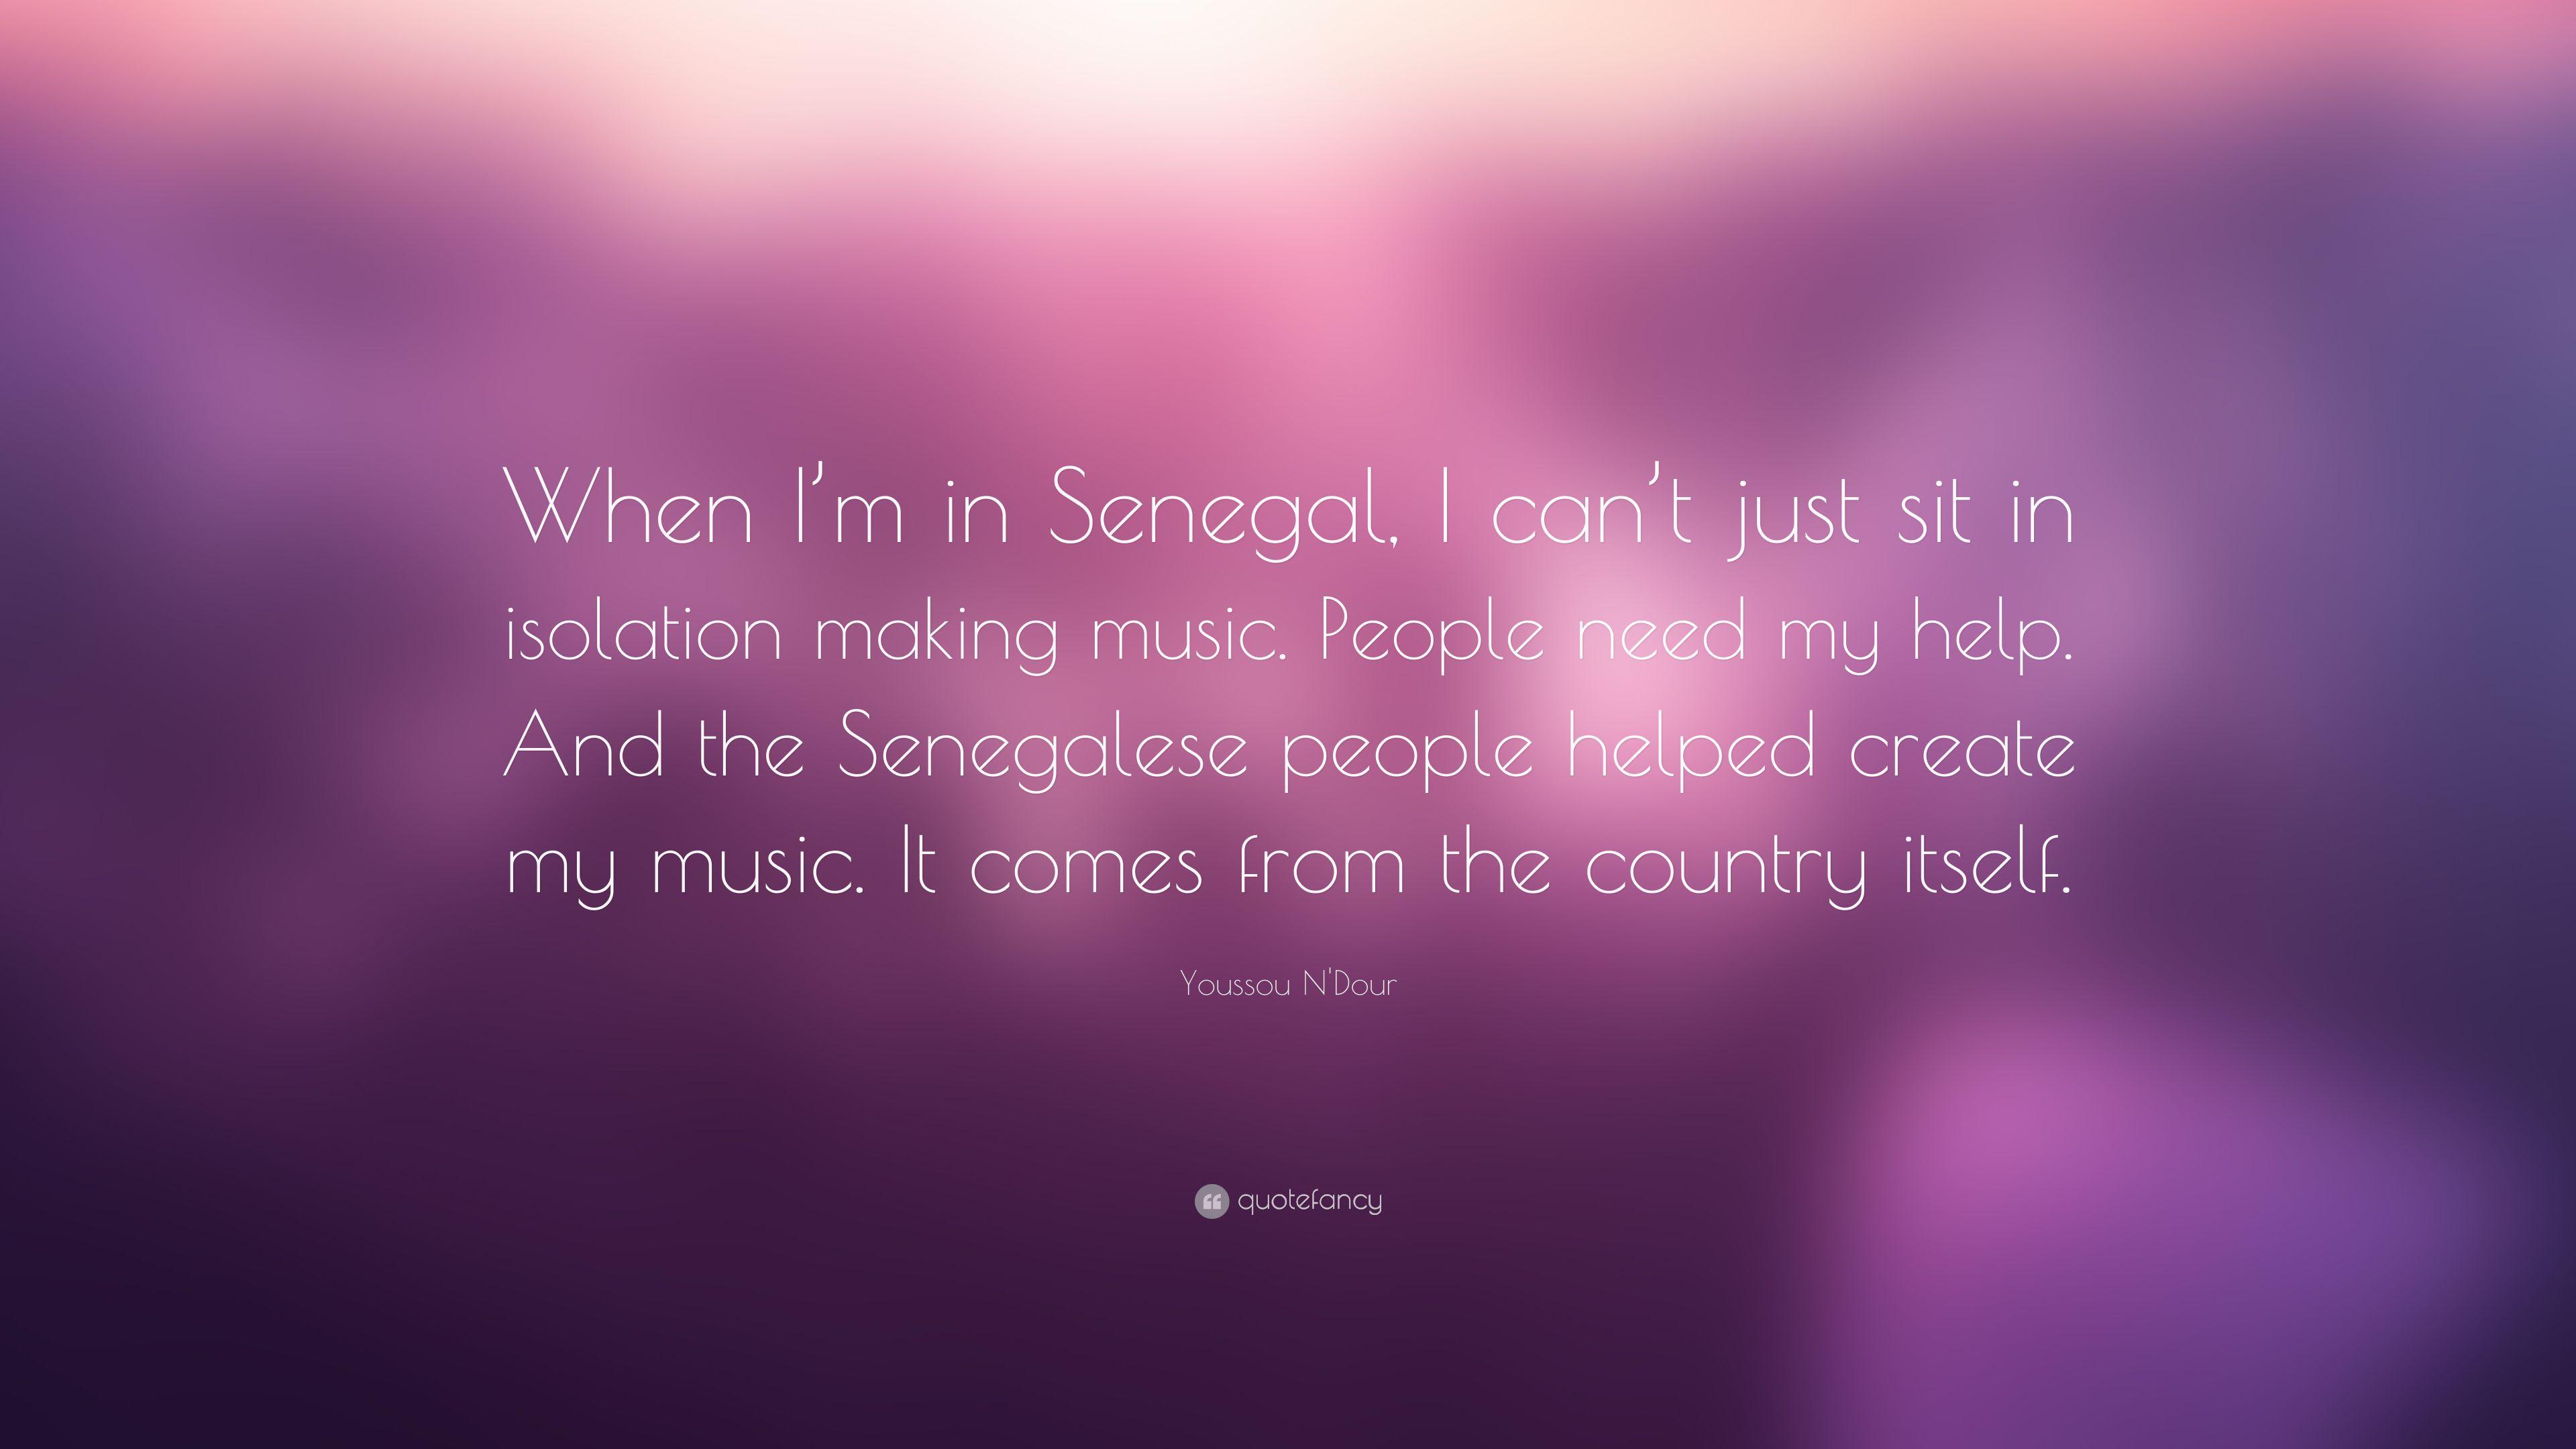 Youssou N'Dour Quote: “When I'm in Senegal, I can't just sit